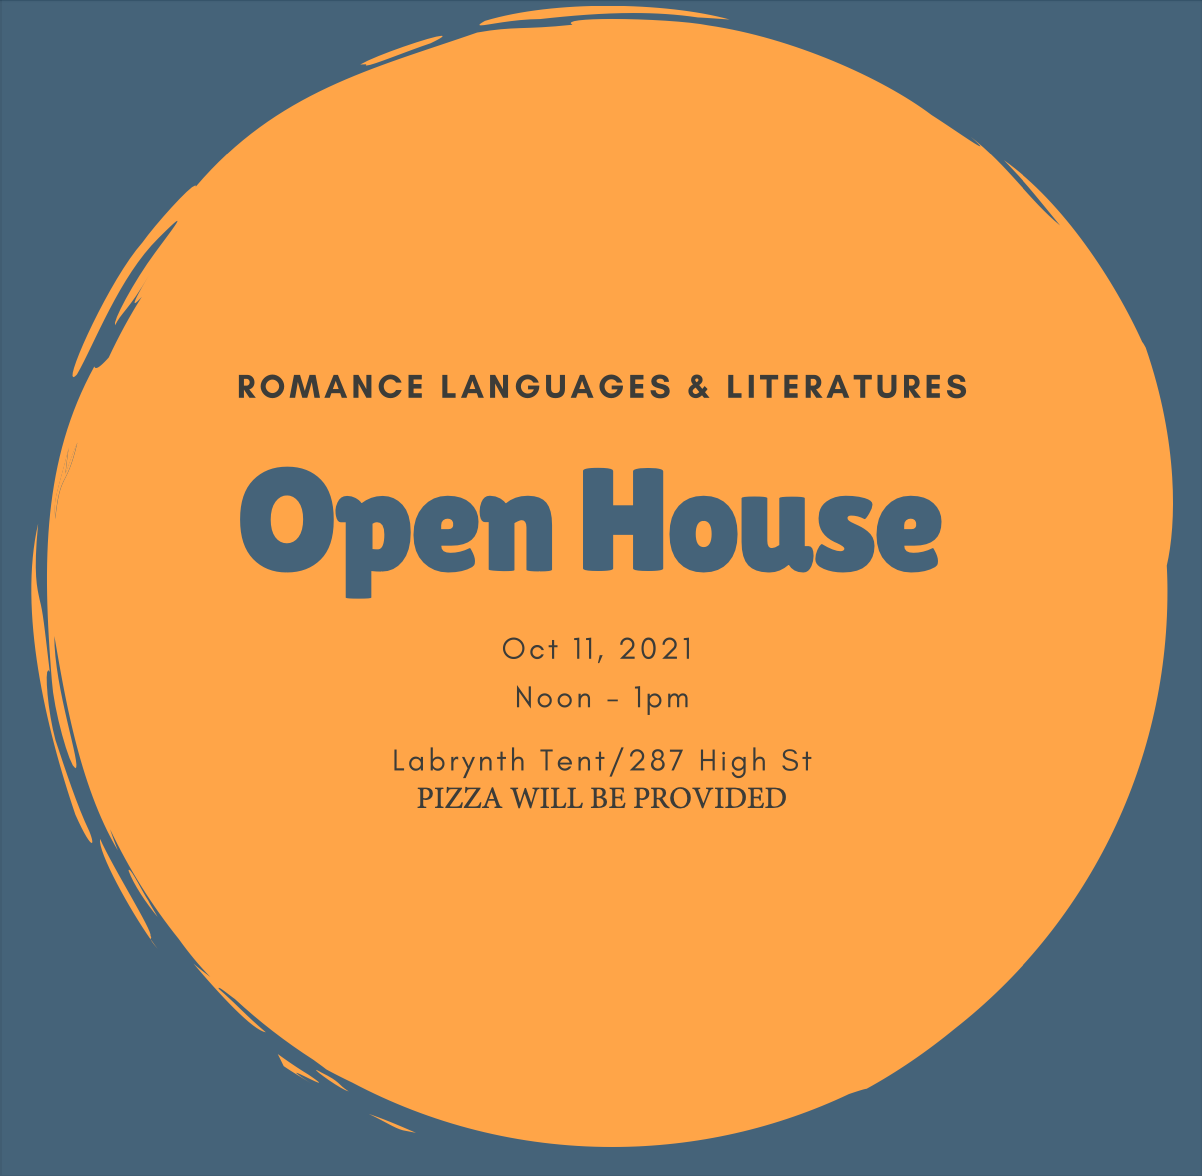 Romance Languages and Literatures Open House 10/11 Labyrinth Tent